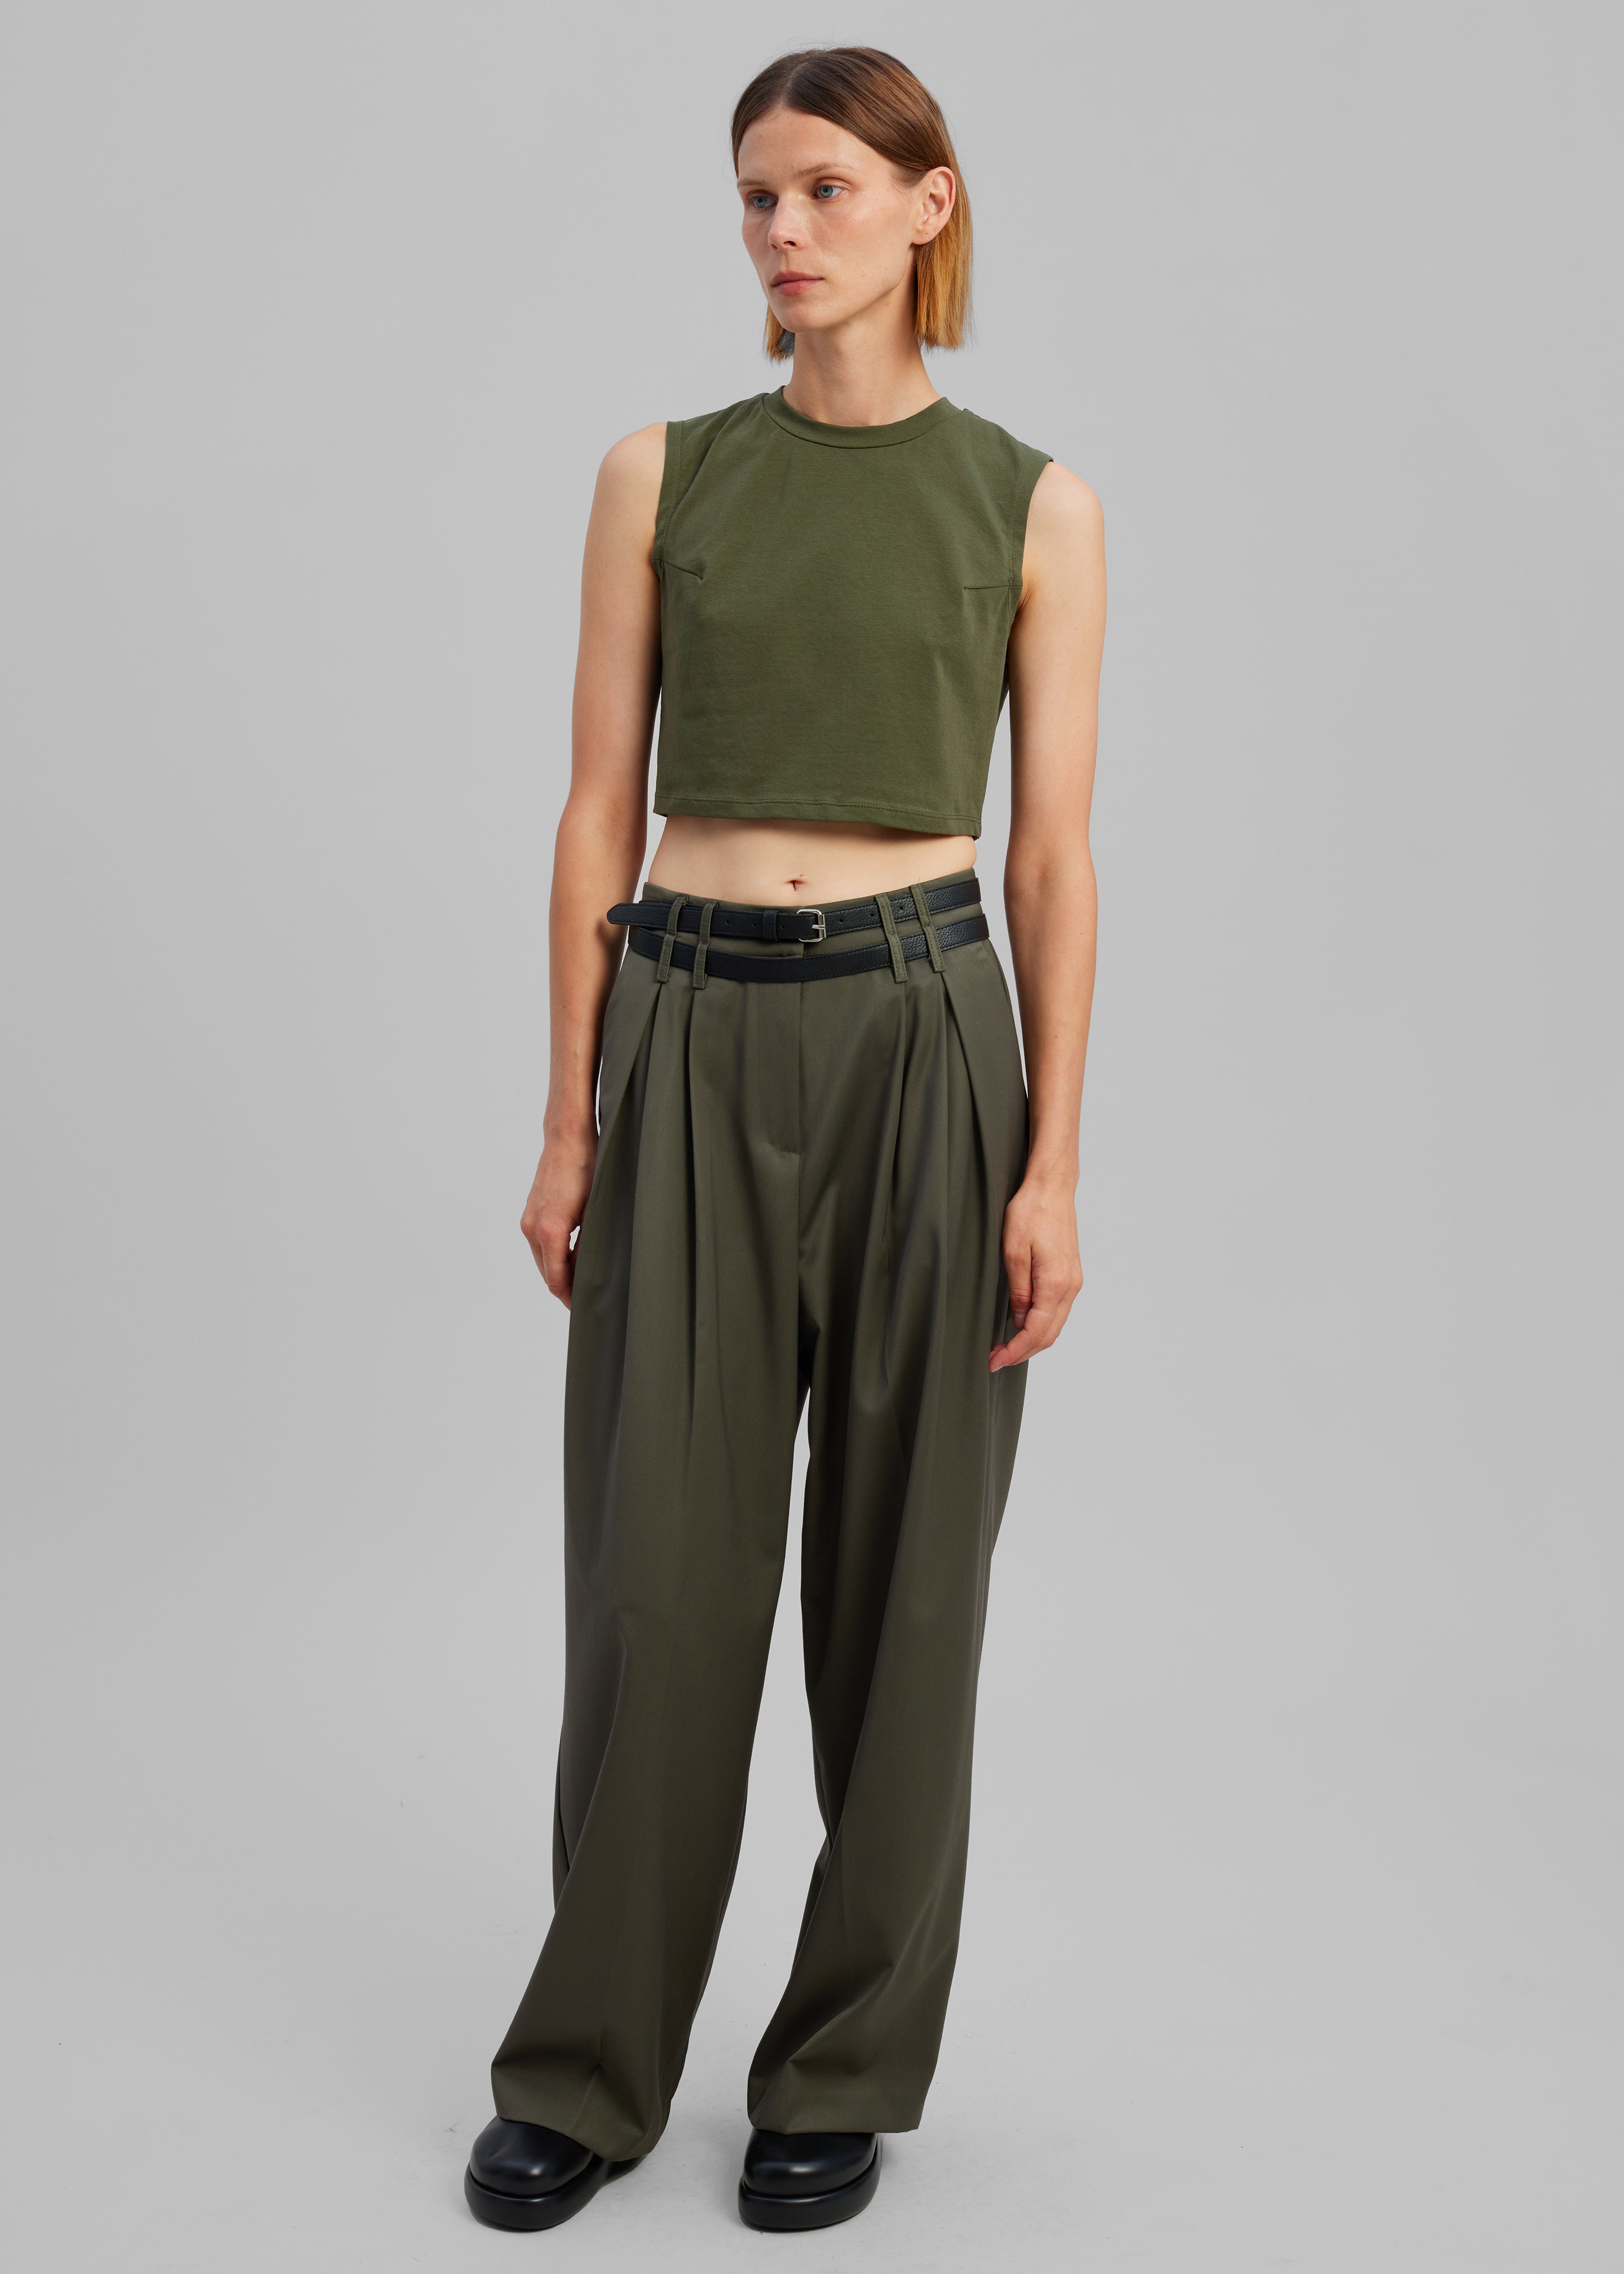 Nellie Belted Pleated Pants - Olive - 4